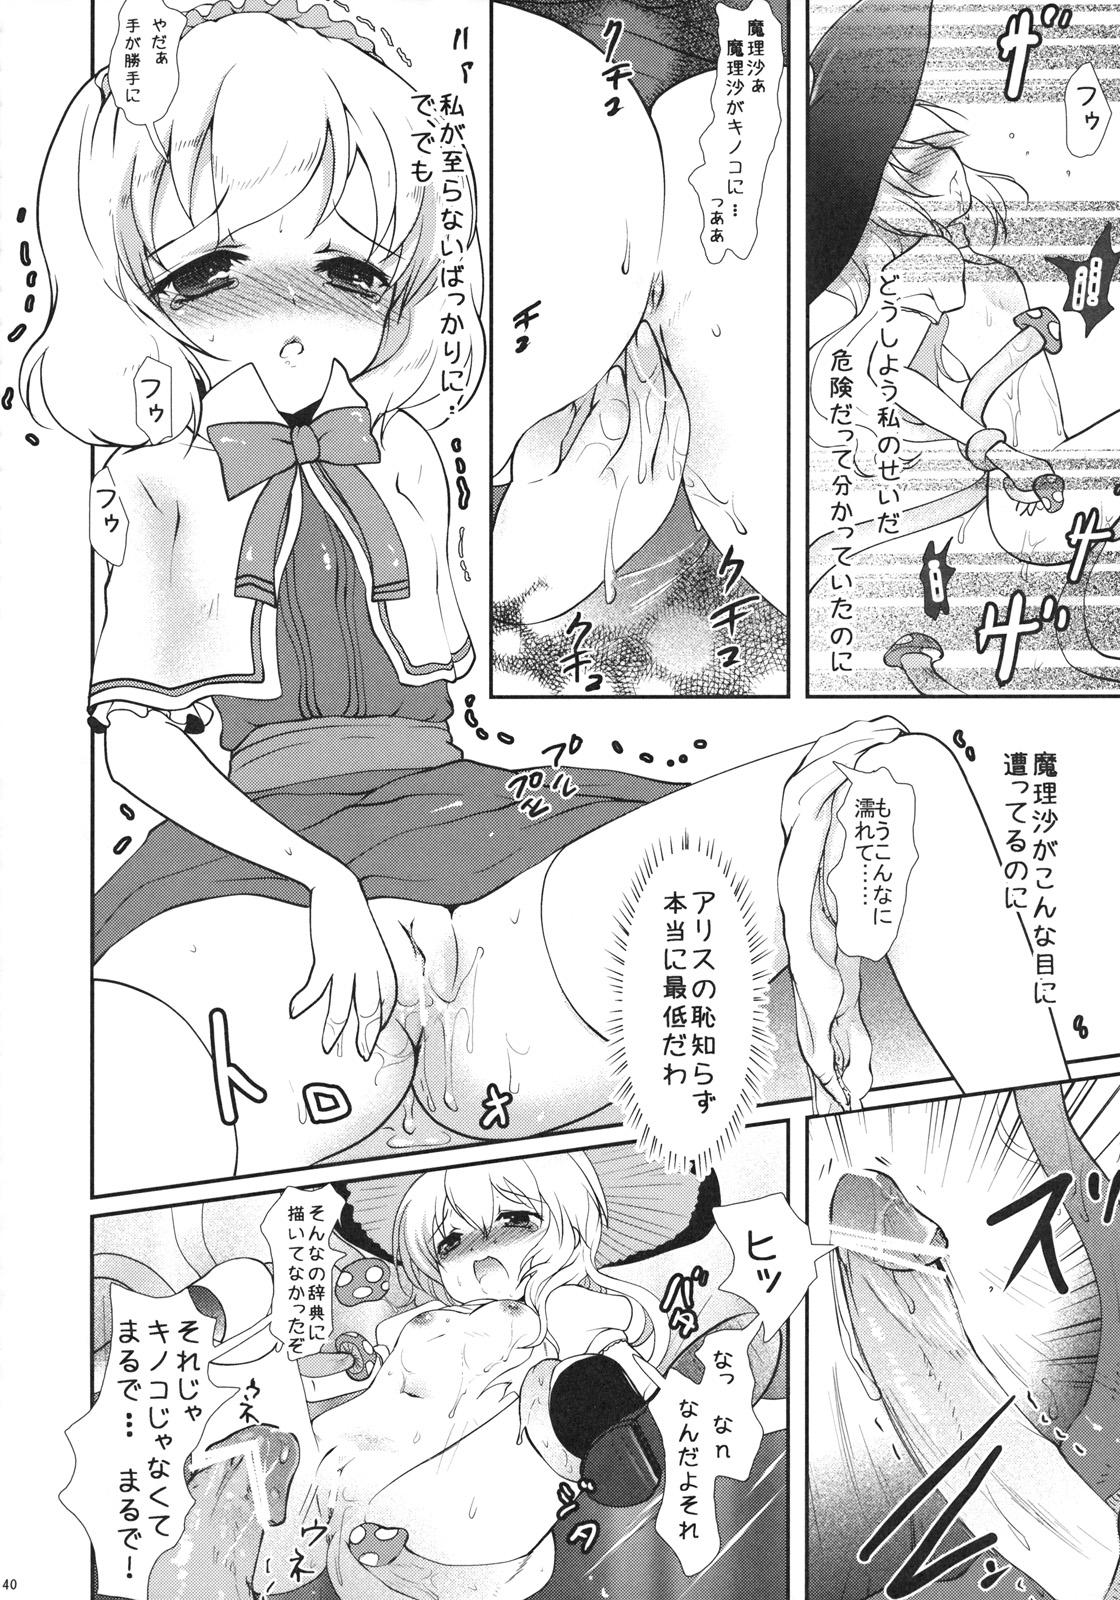 Porn Blow Jobs 2008-2009 Matome Hon 1 - Touhou project Abuse - Page 12